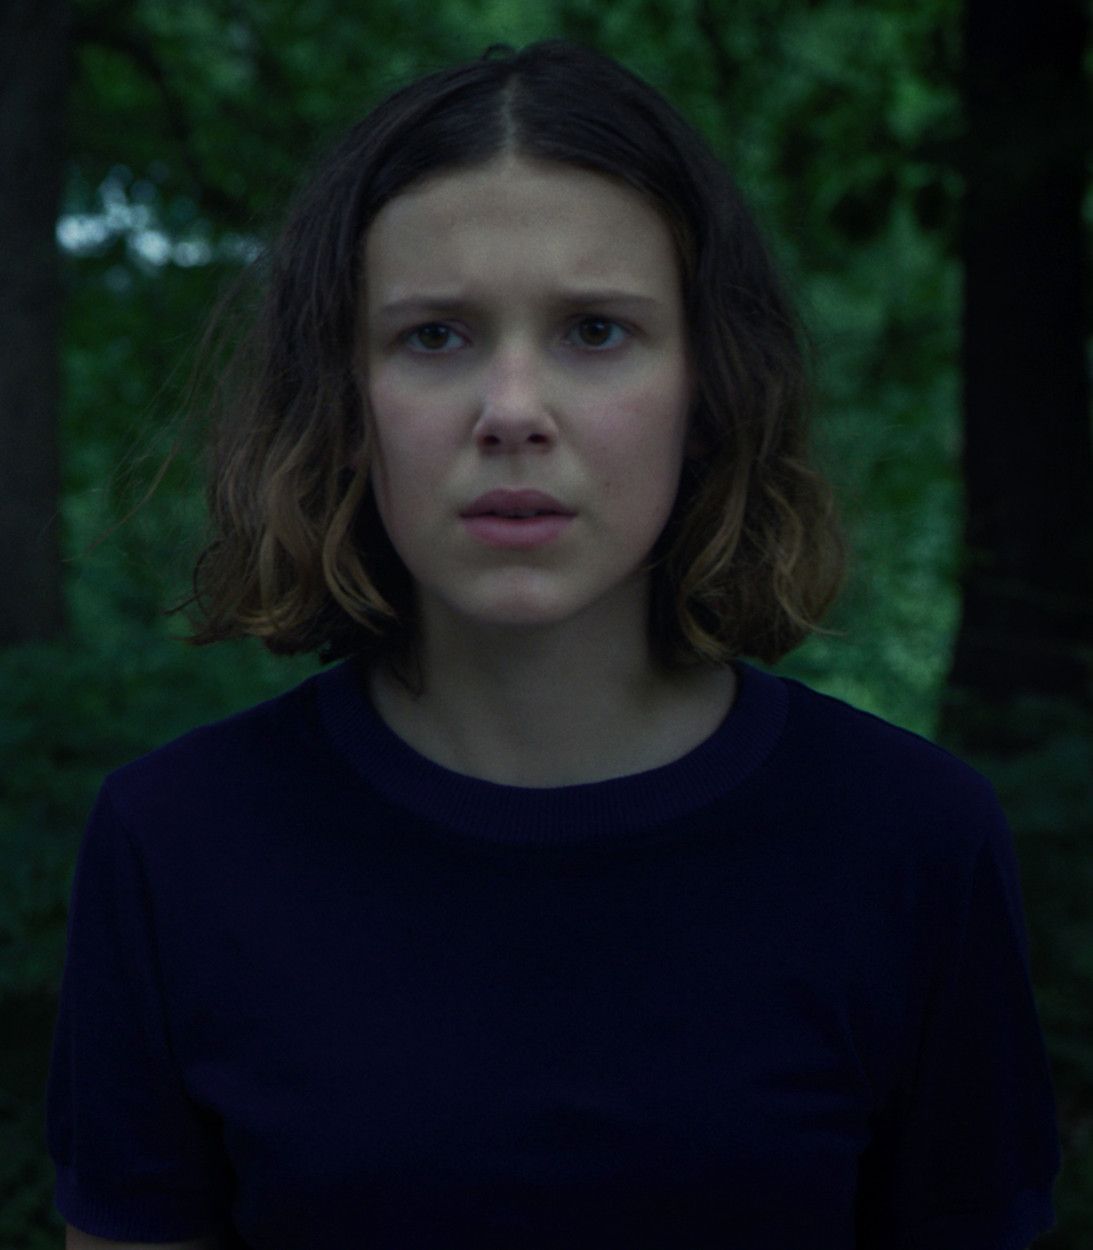 Millie Bobby Brown As Eleven In Stranger Things 3